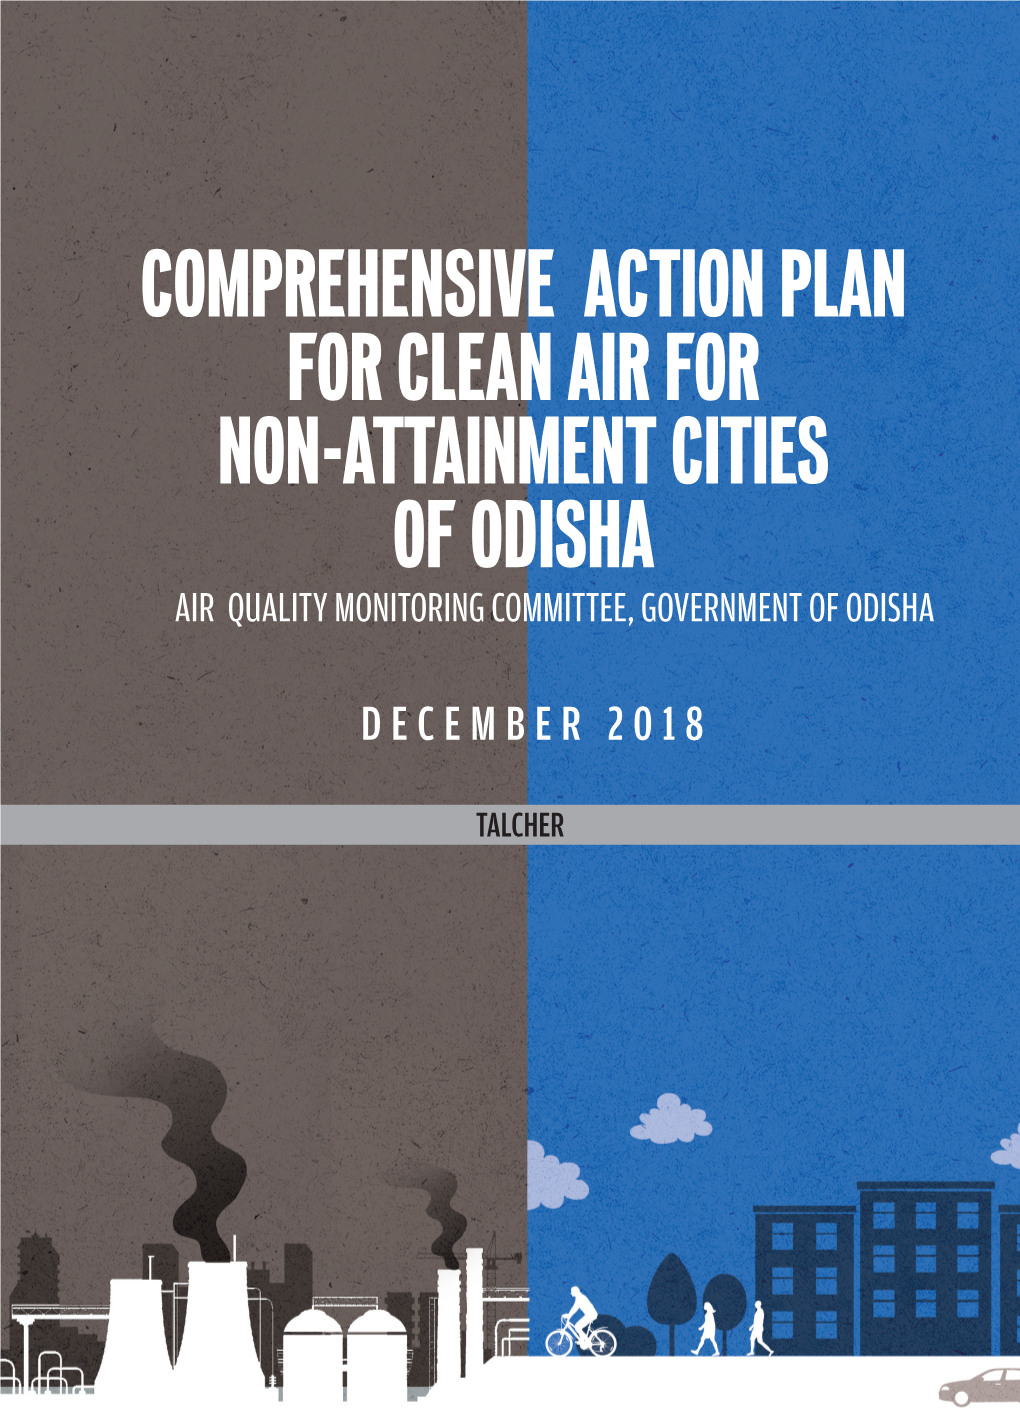 Comprehensive Action Plan for Clean Air for Non-Attainment Cities of Odisha Air Quality Monitoring Committee, Government of Odisha